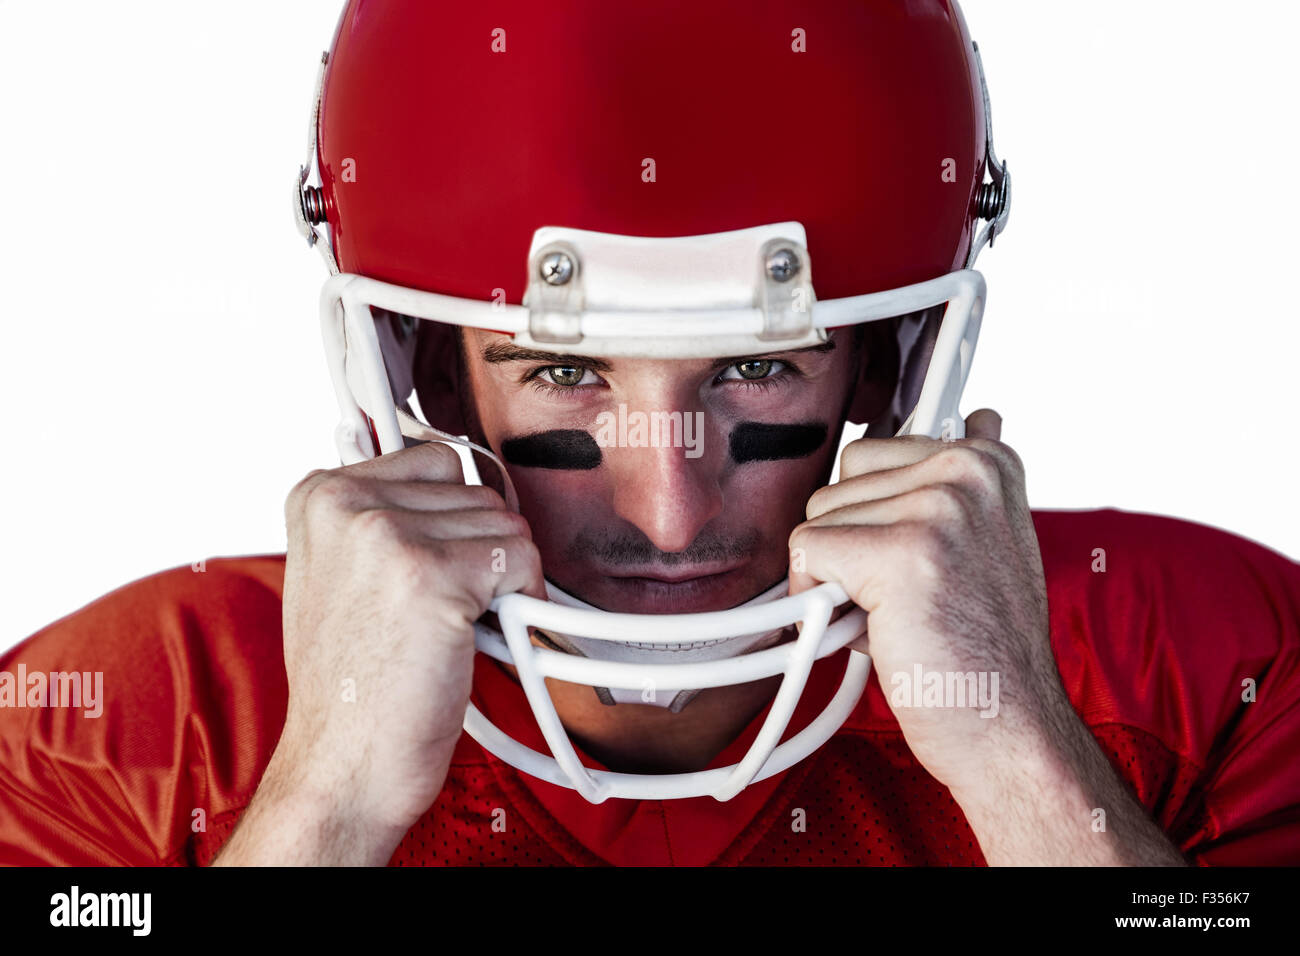 Portrait of rugby player wit hands on helmet Stock Photo